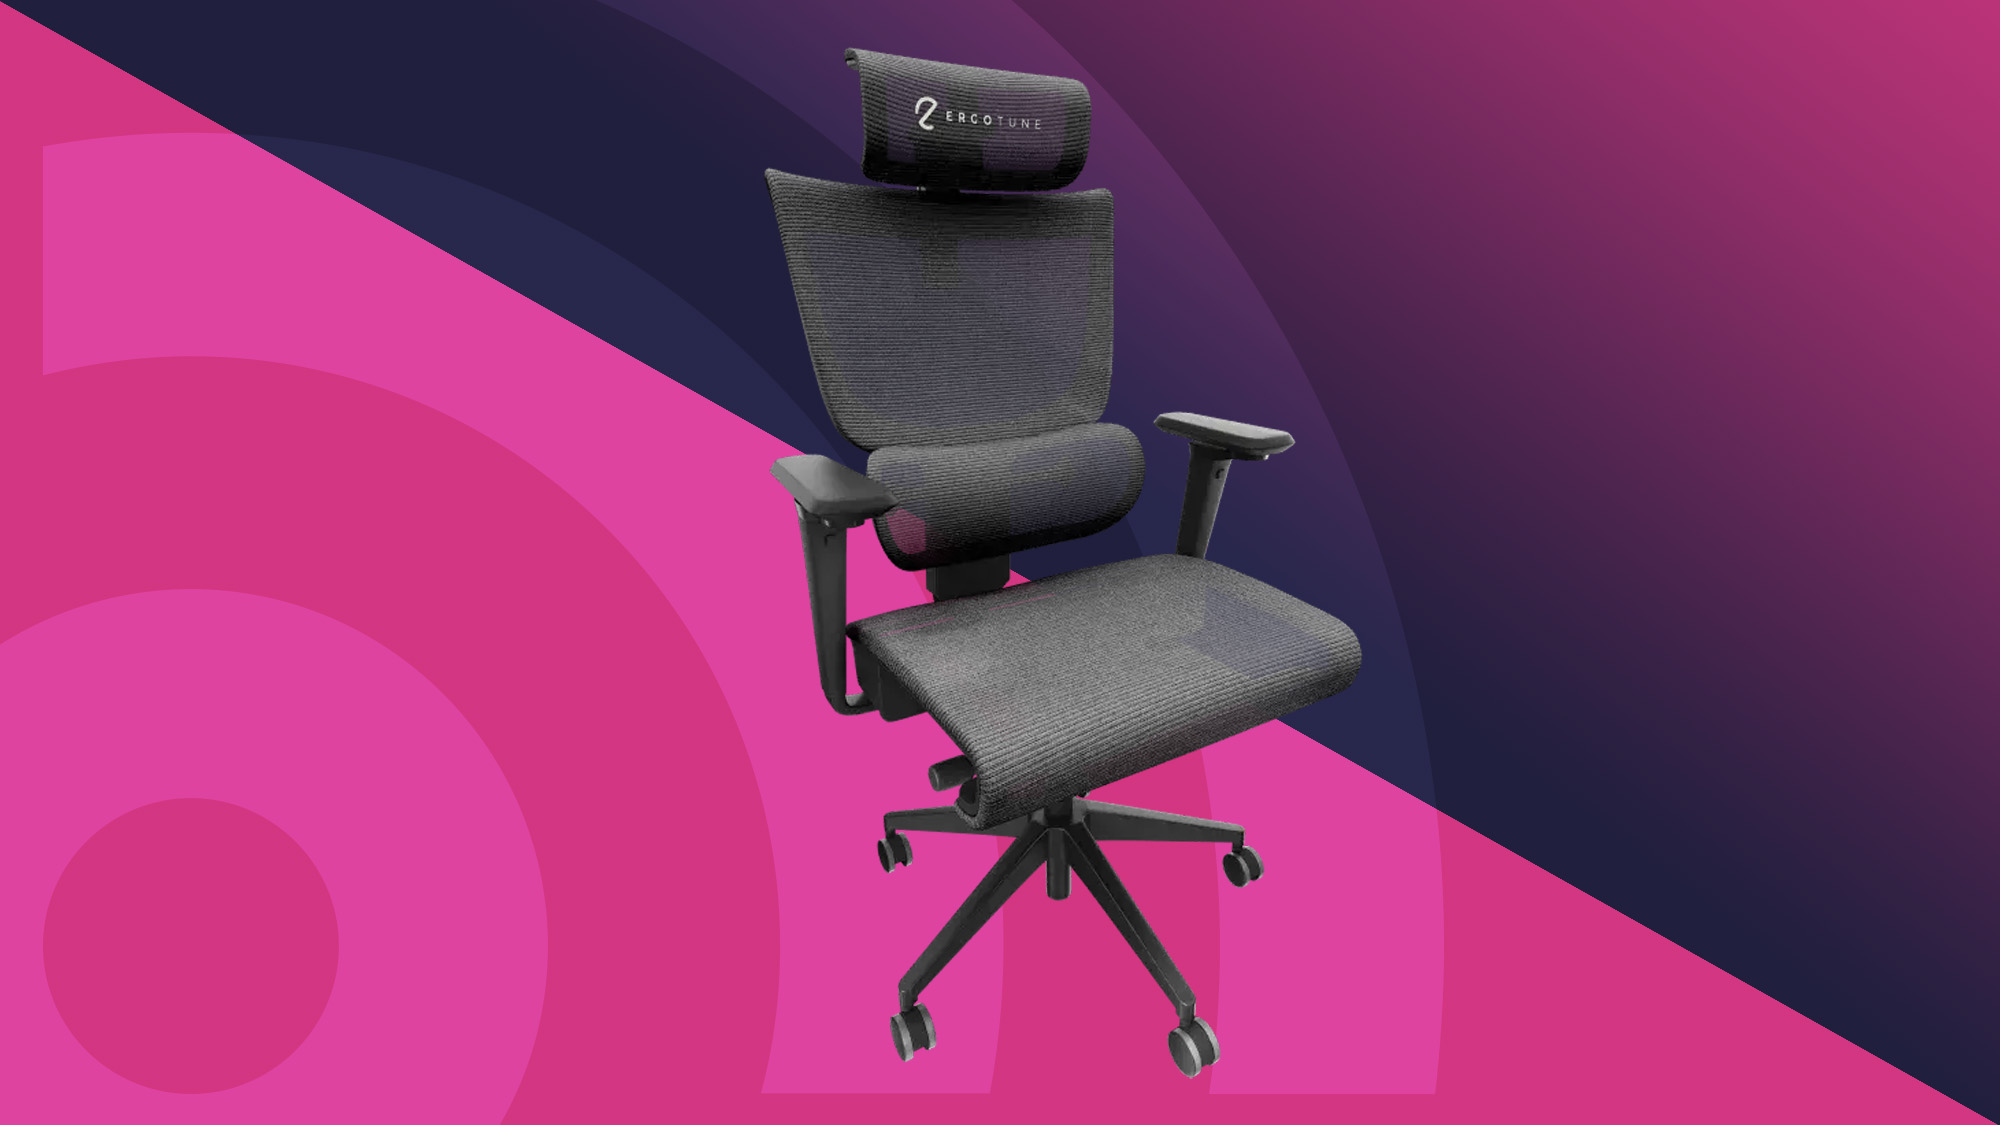 The 5 Best Office Chairs for Pregnancy